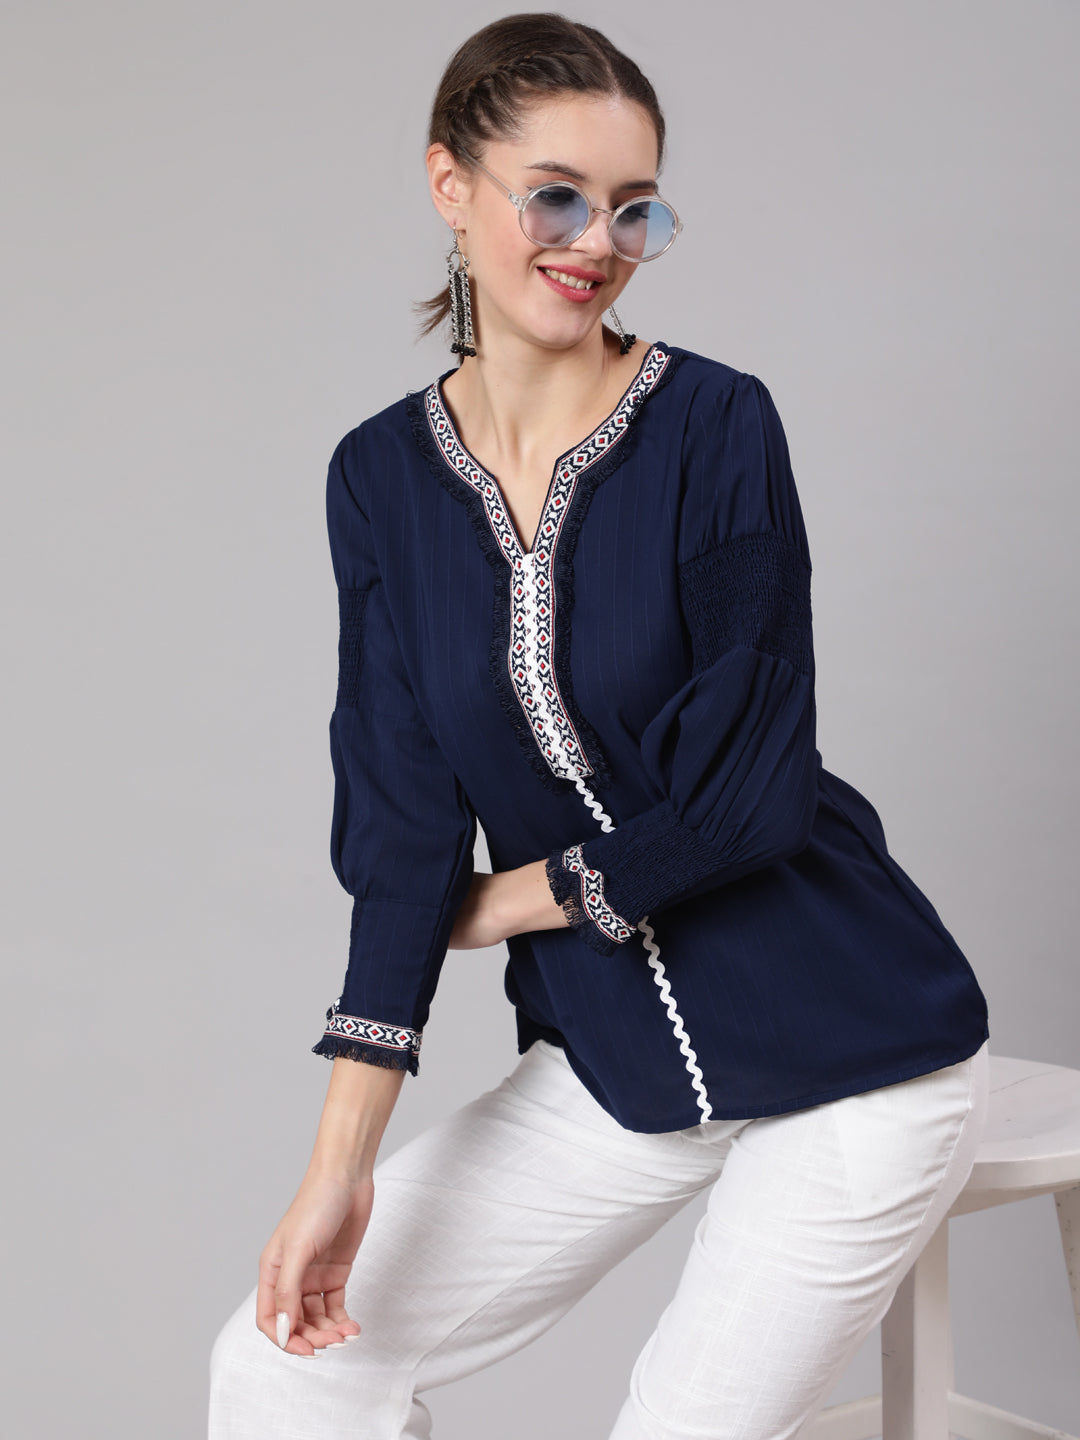 A Blue Silk Blend Lace Embellished Top With Smocked Sleeves With Wide-Leg White Pants